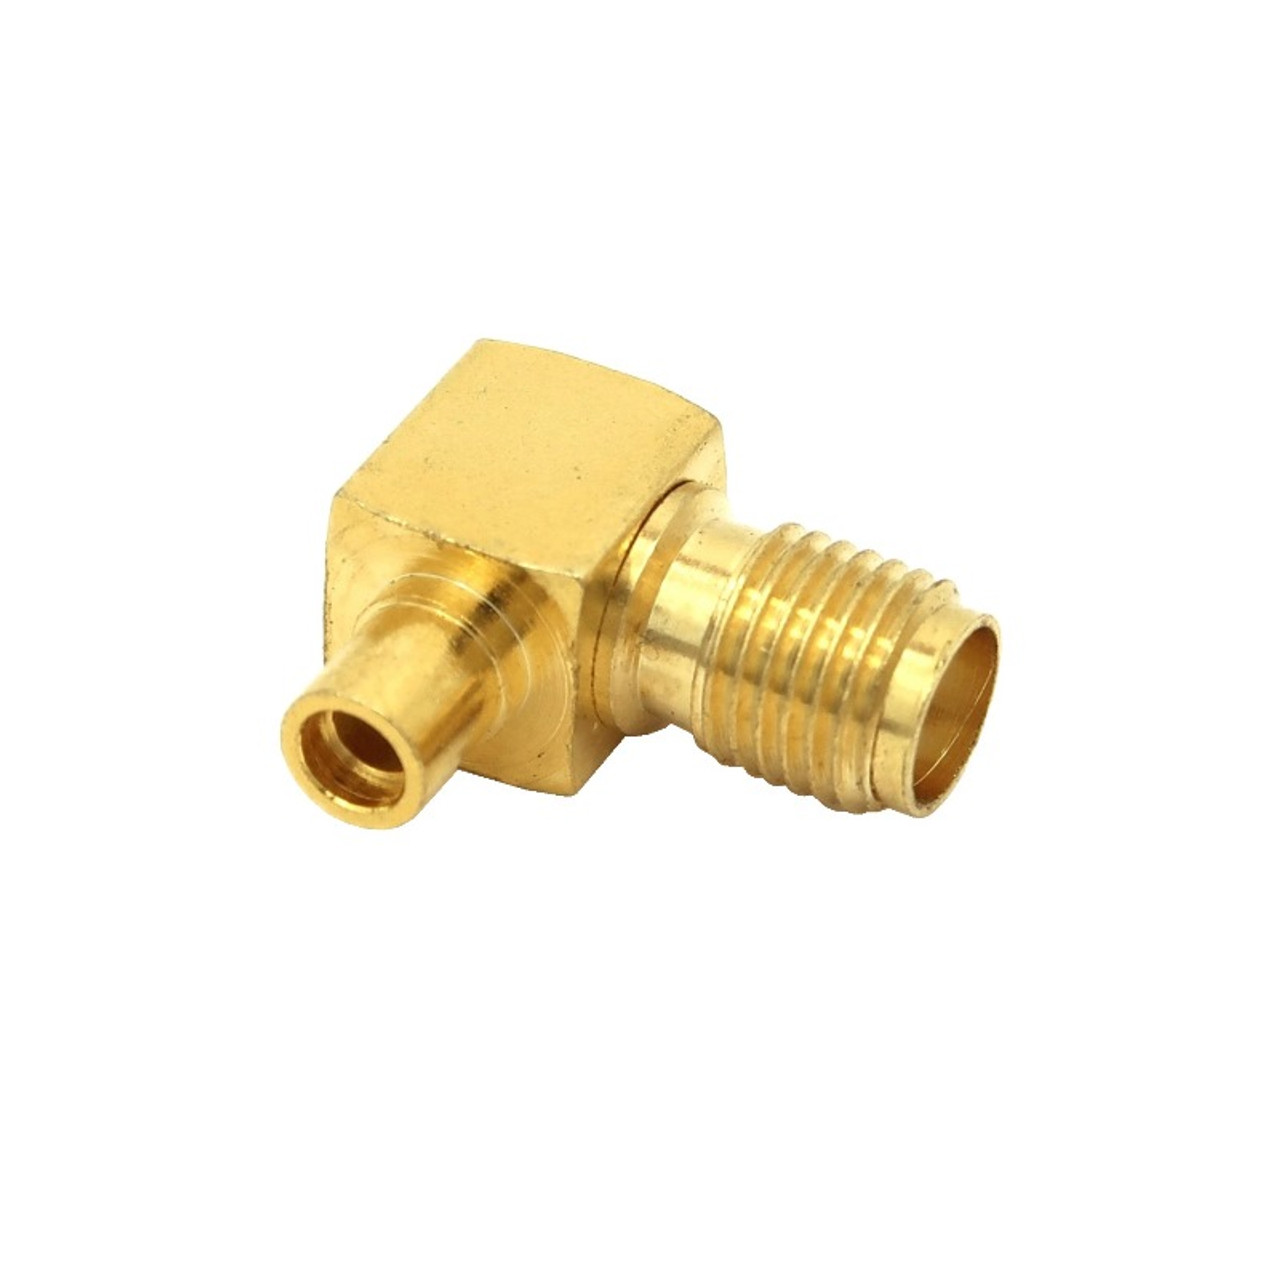 MMCX Jack to SMA Female Elbow Coaxial Adapter Connector - ARS-H203